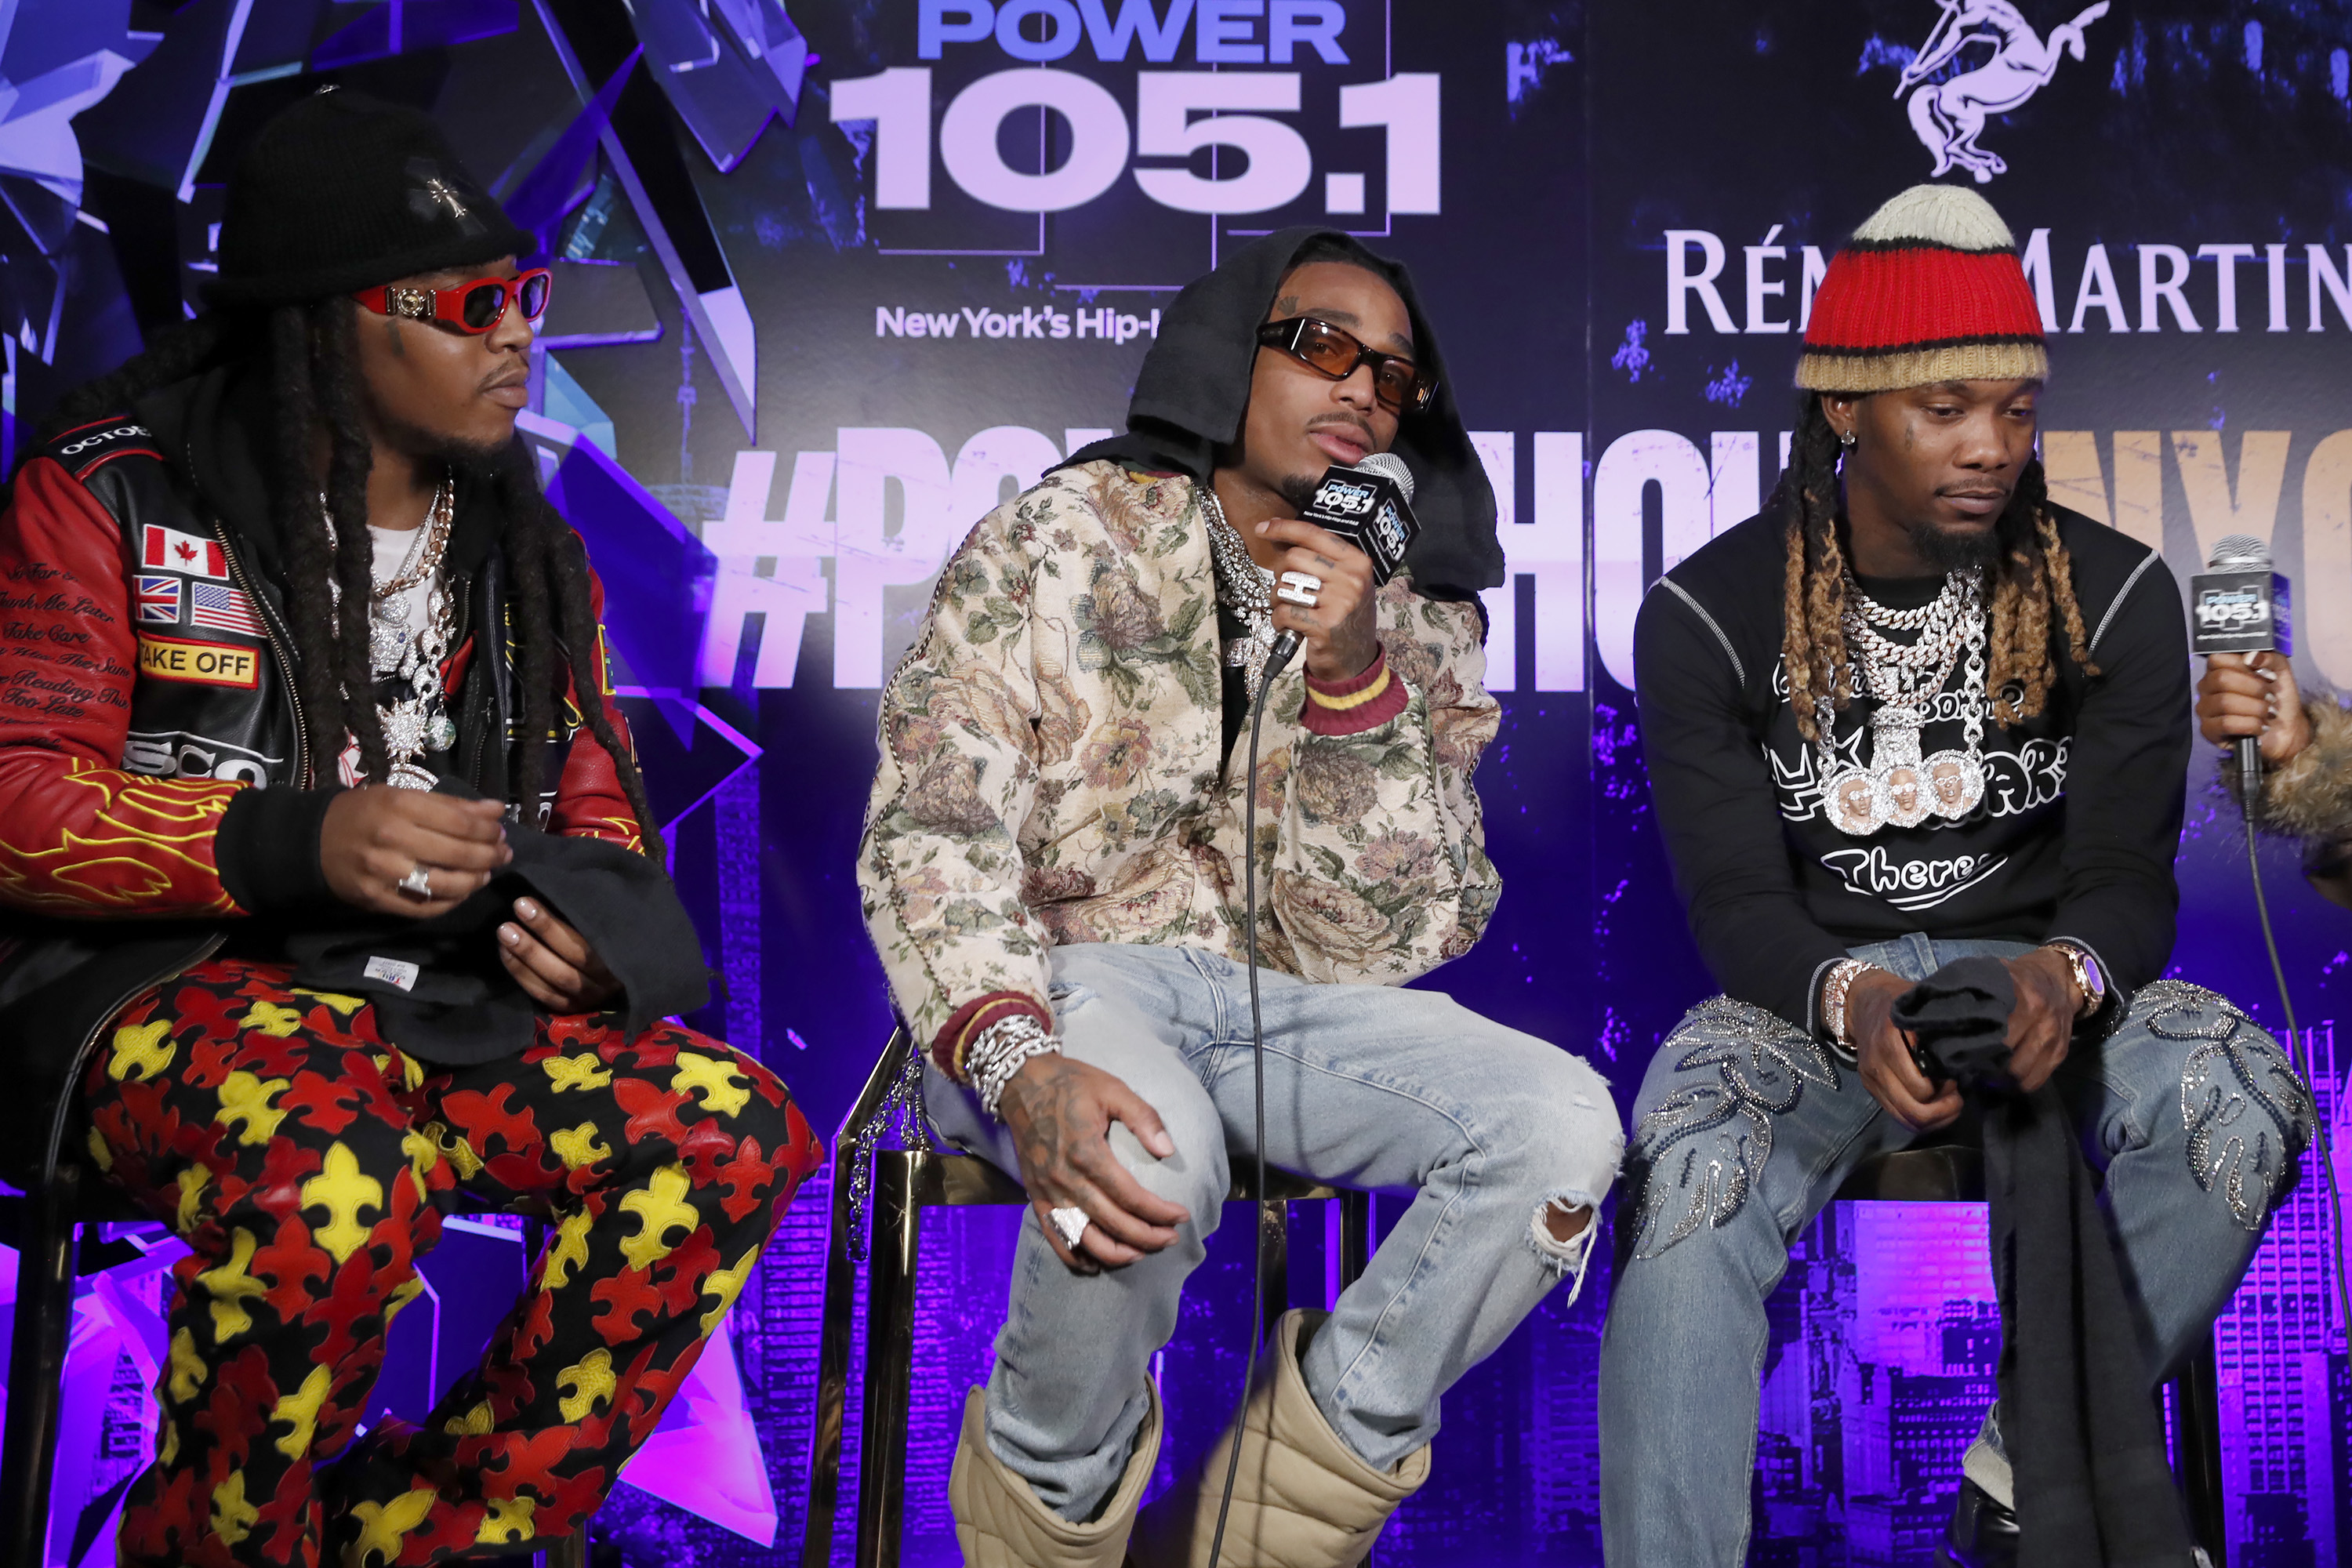 The members of Migos sit on chairs during a radio show appearance